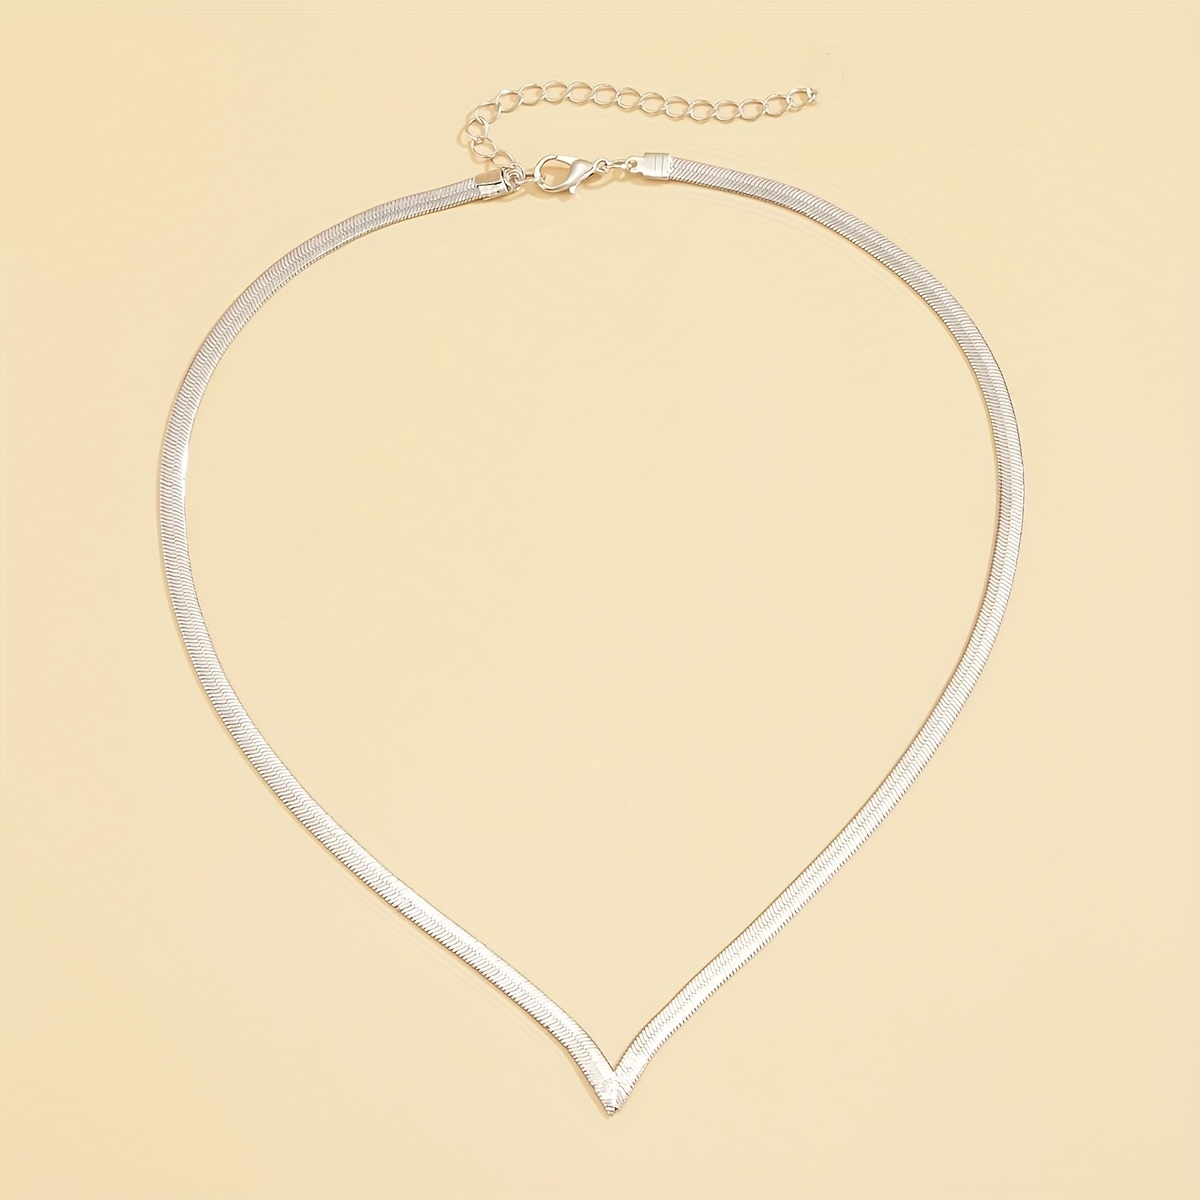 Fashion Simple V-Shaped Flat Snake Chain Necklace